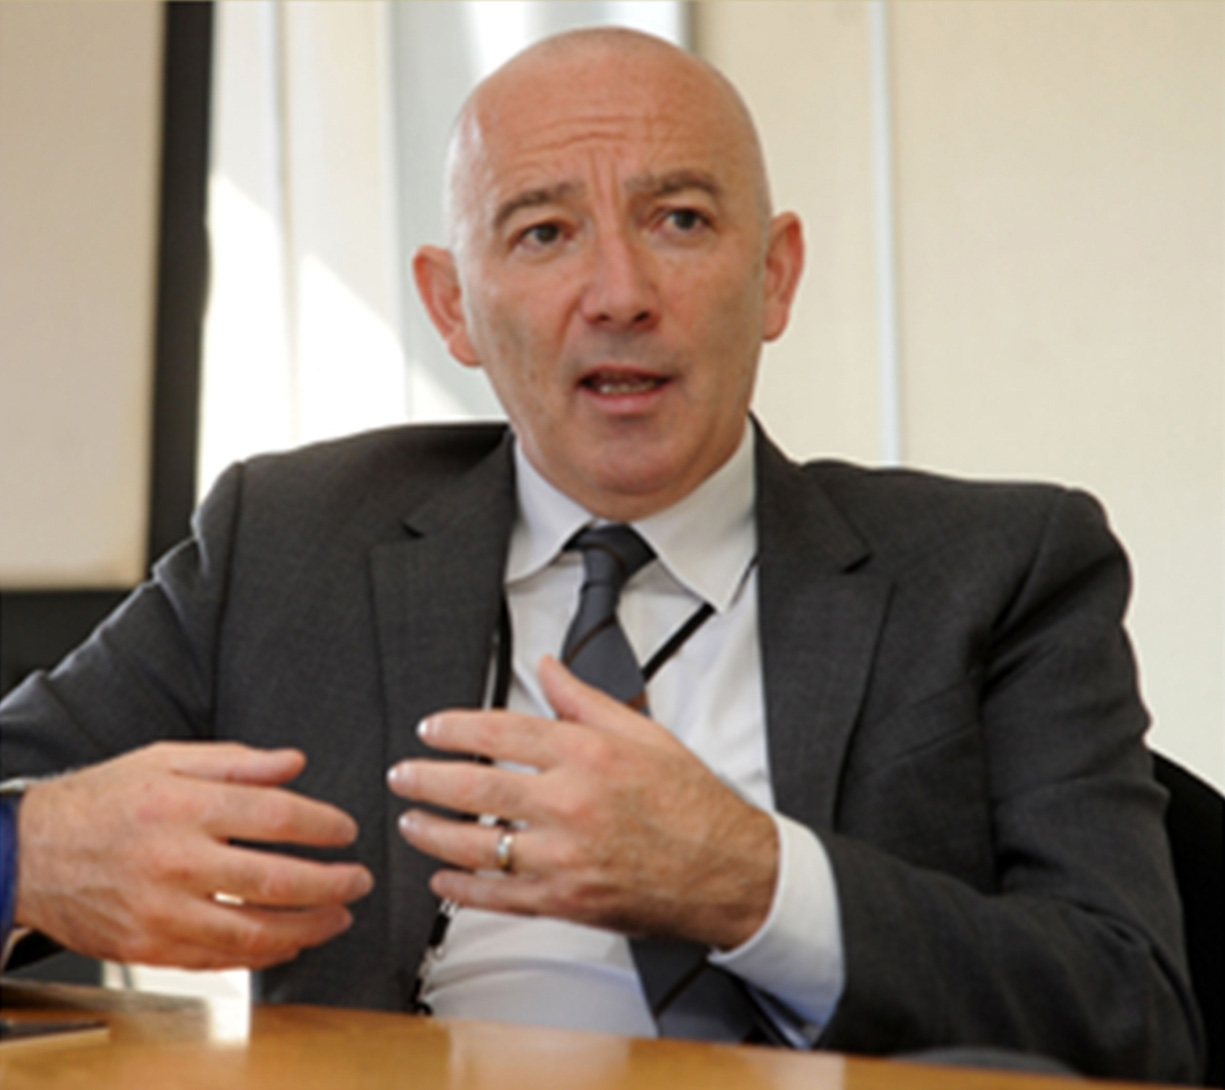 Tim Johnson, Chief Executive of the City of Wolverhampton Council